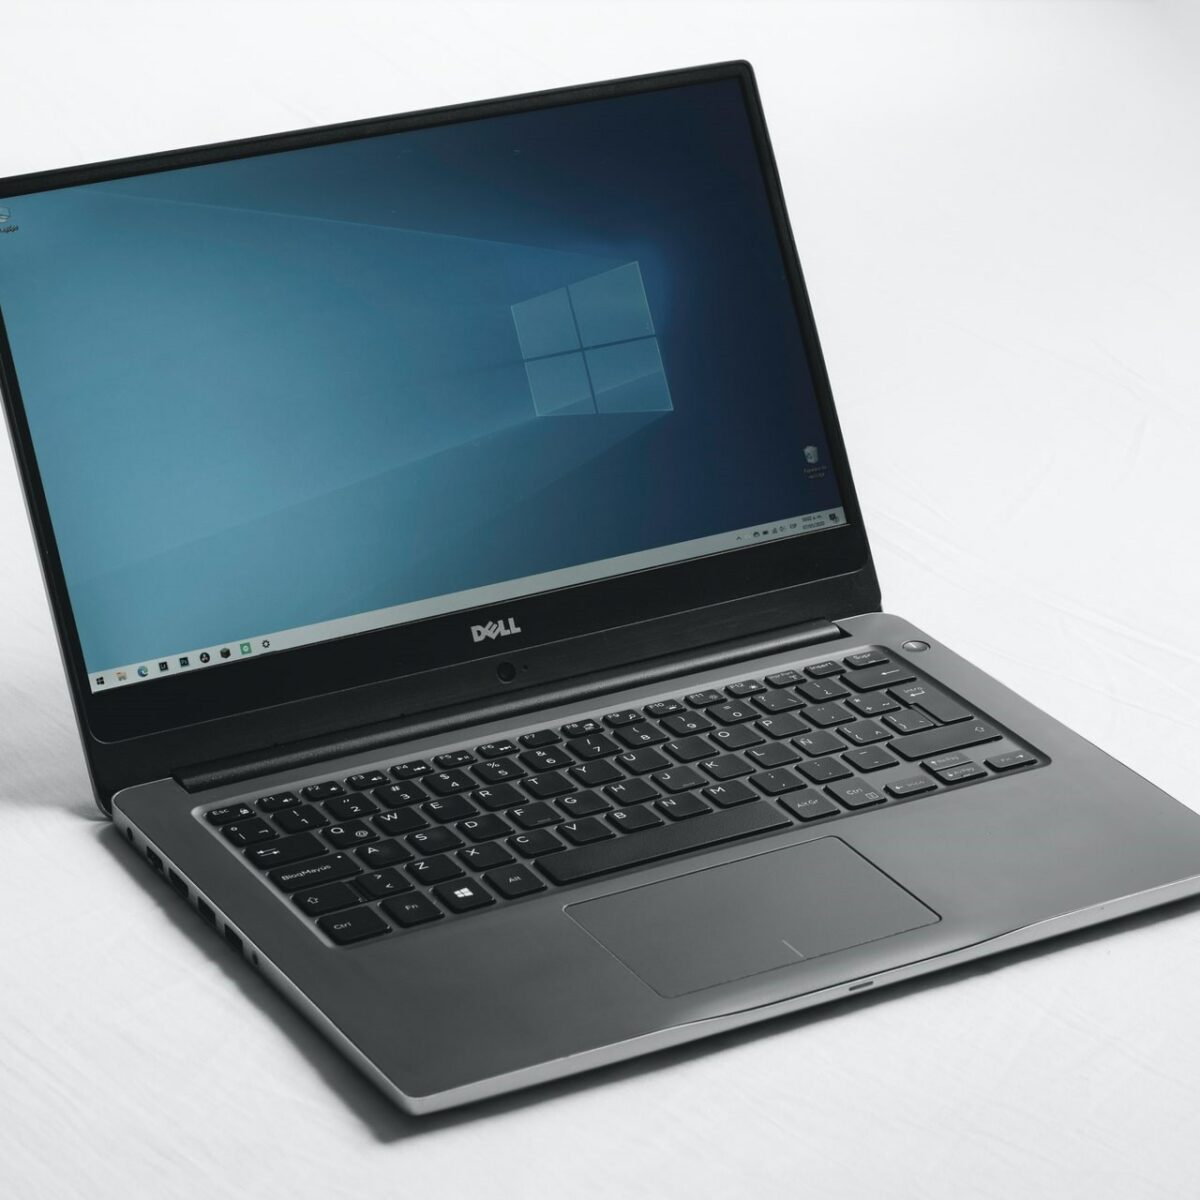 Hiel wat betreft klasse Top 5 Laptops with SSD and HDD for Speed and Performance